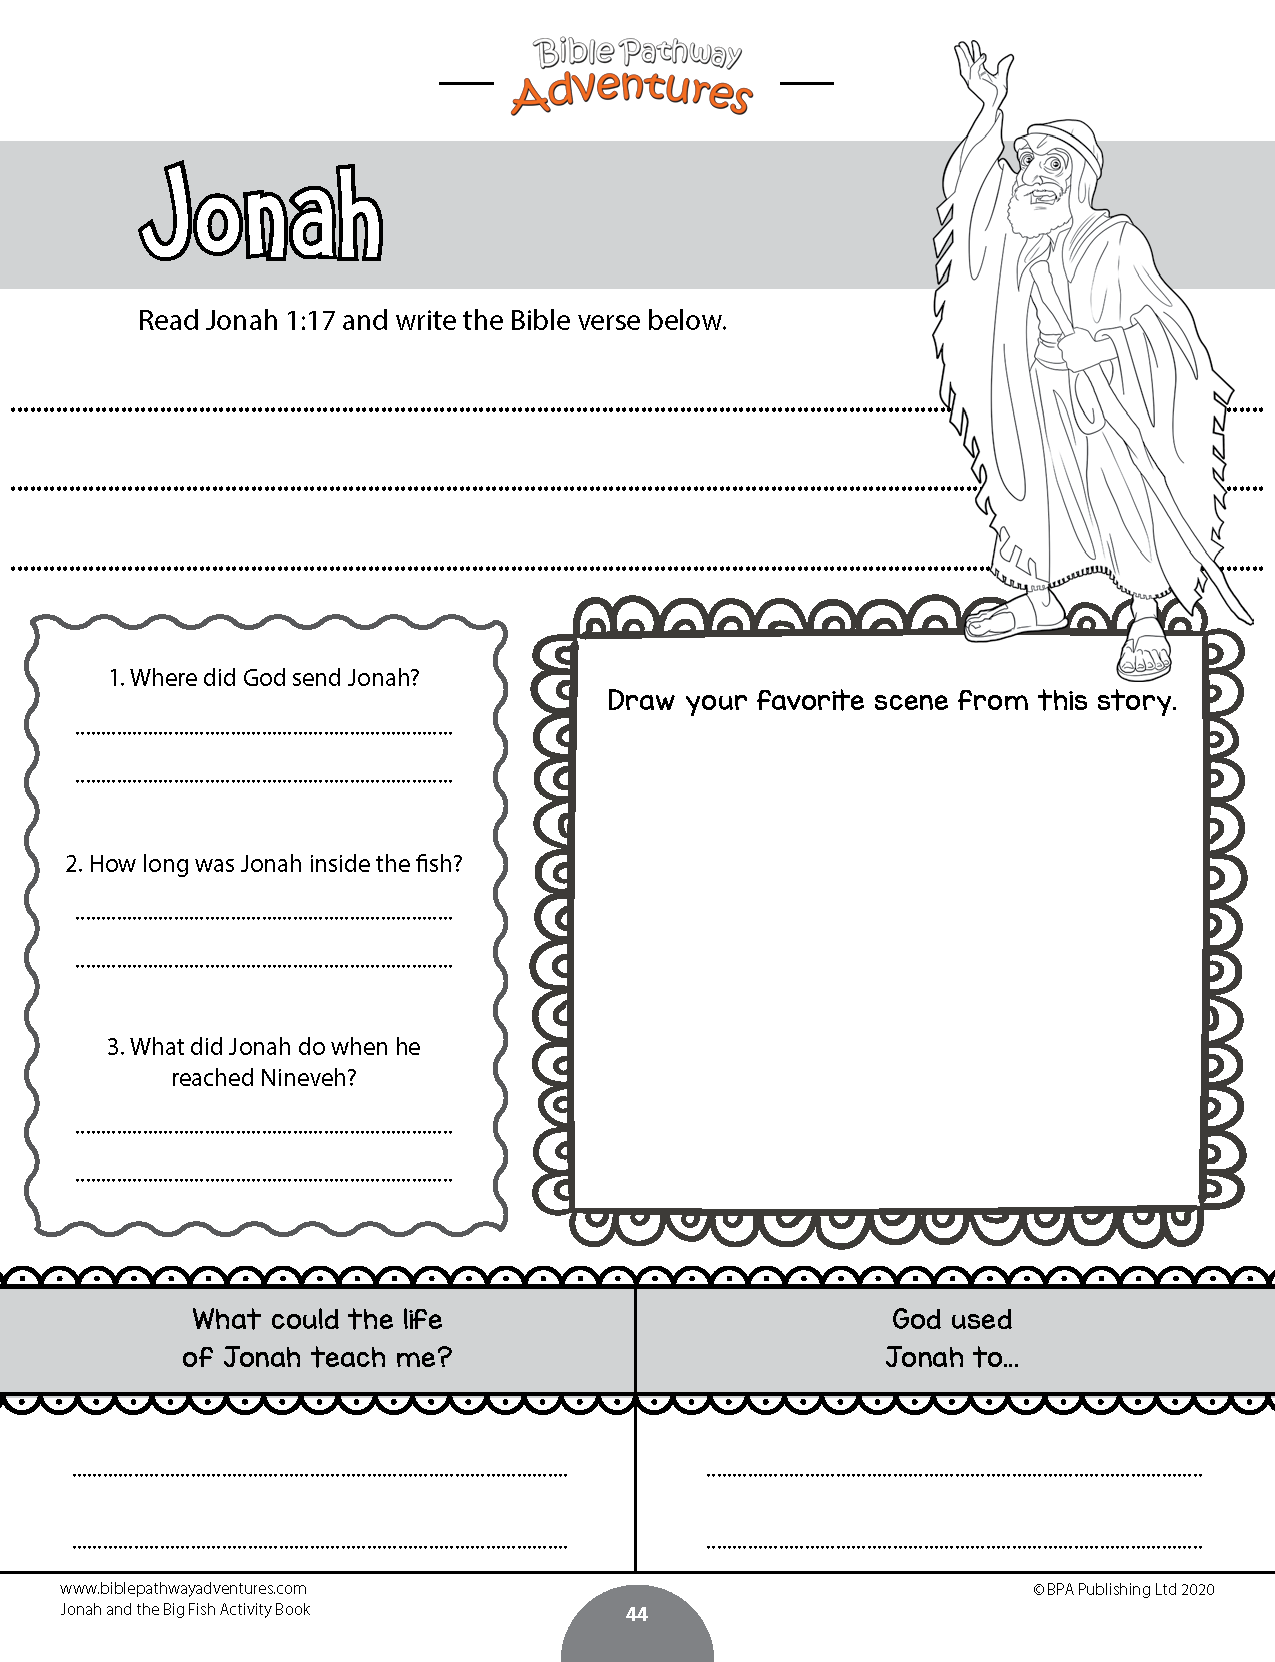 Jonah and the Big Fish Activity Book (paperback)